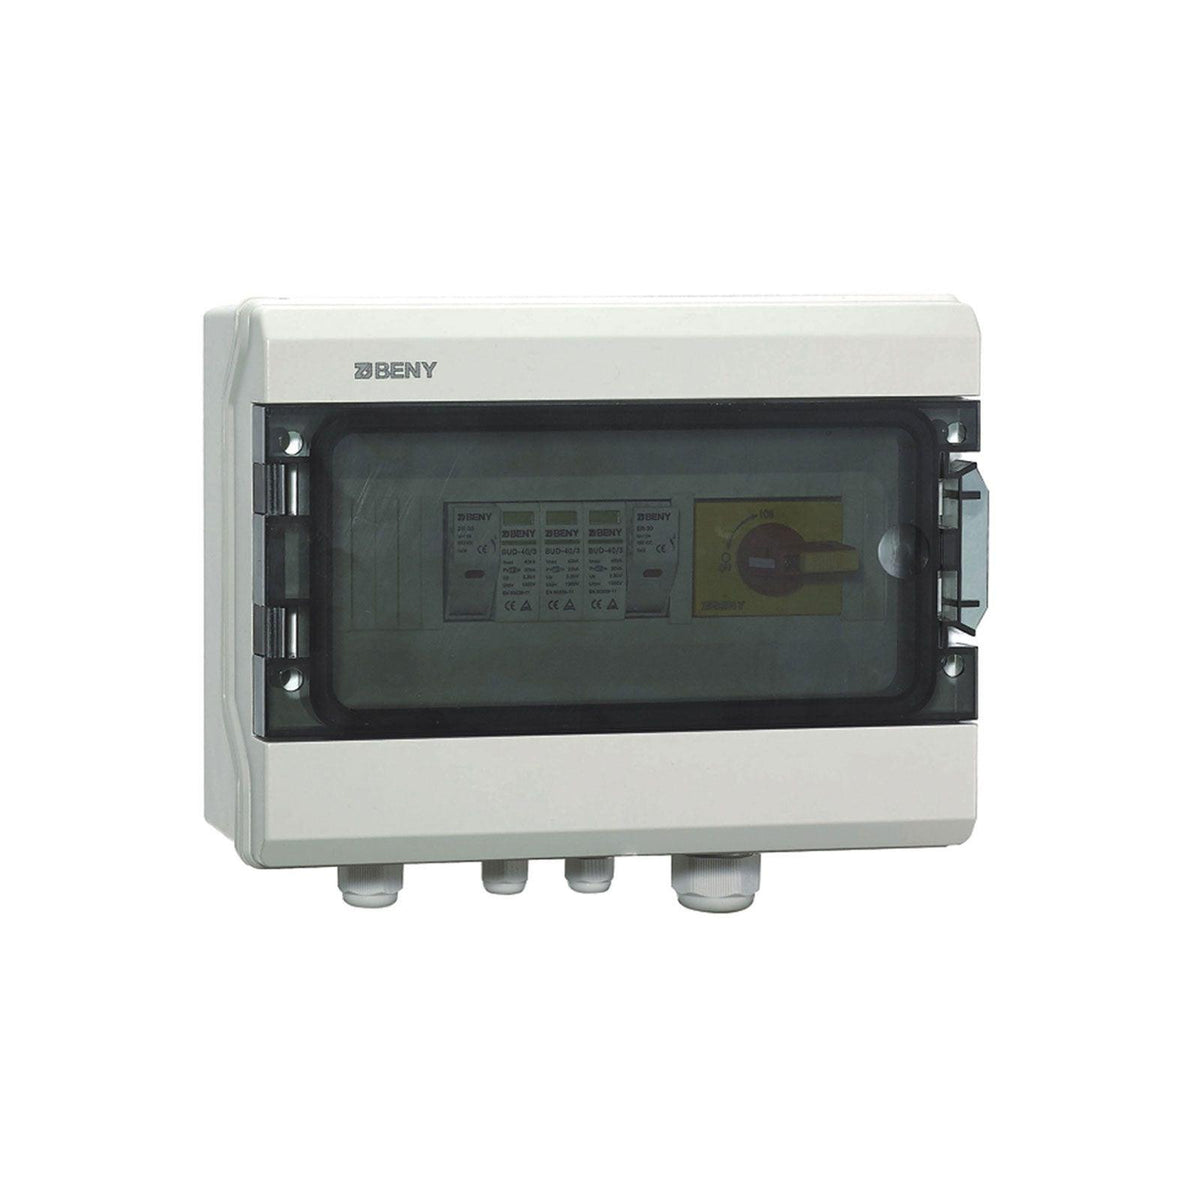 PV Combiner DC Switch Box 2-way Input 1-way Output - VoltaconSolar